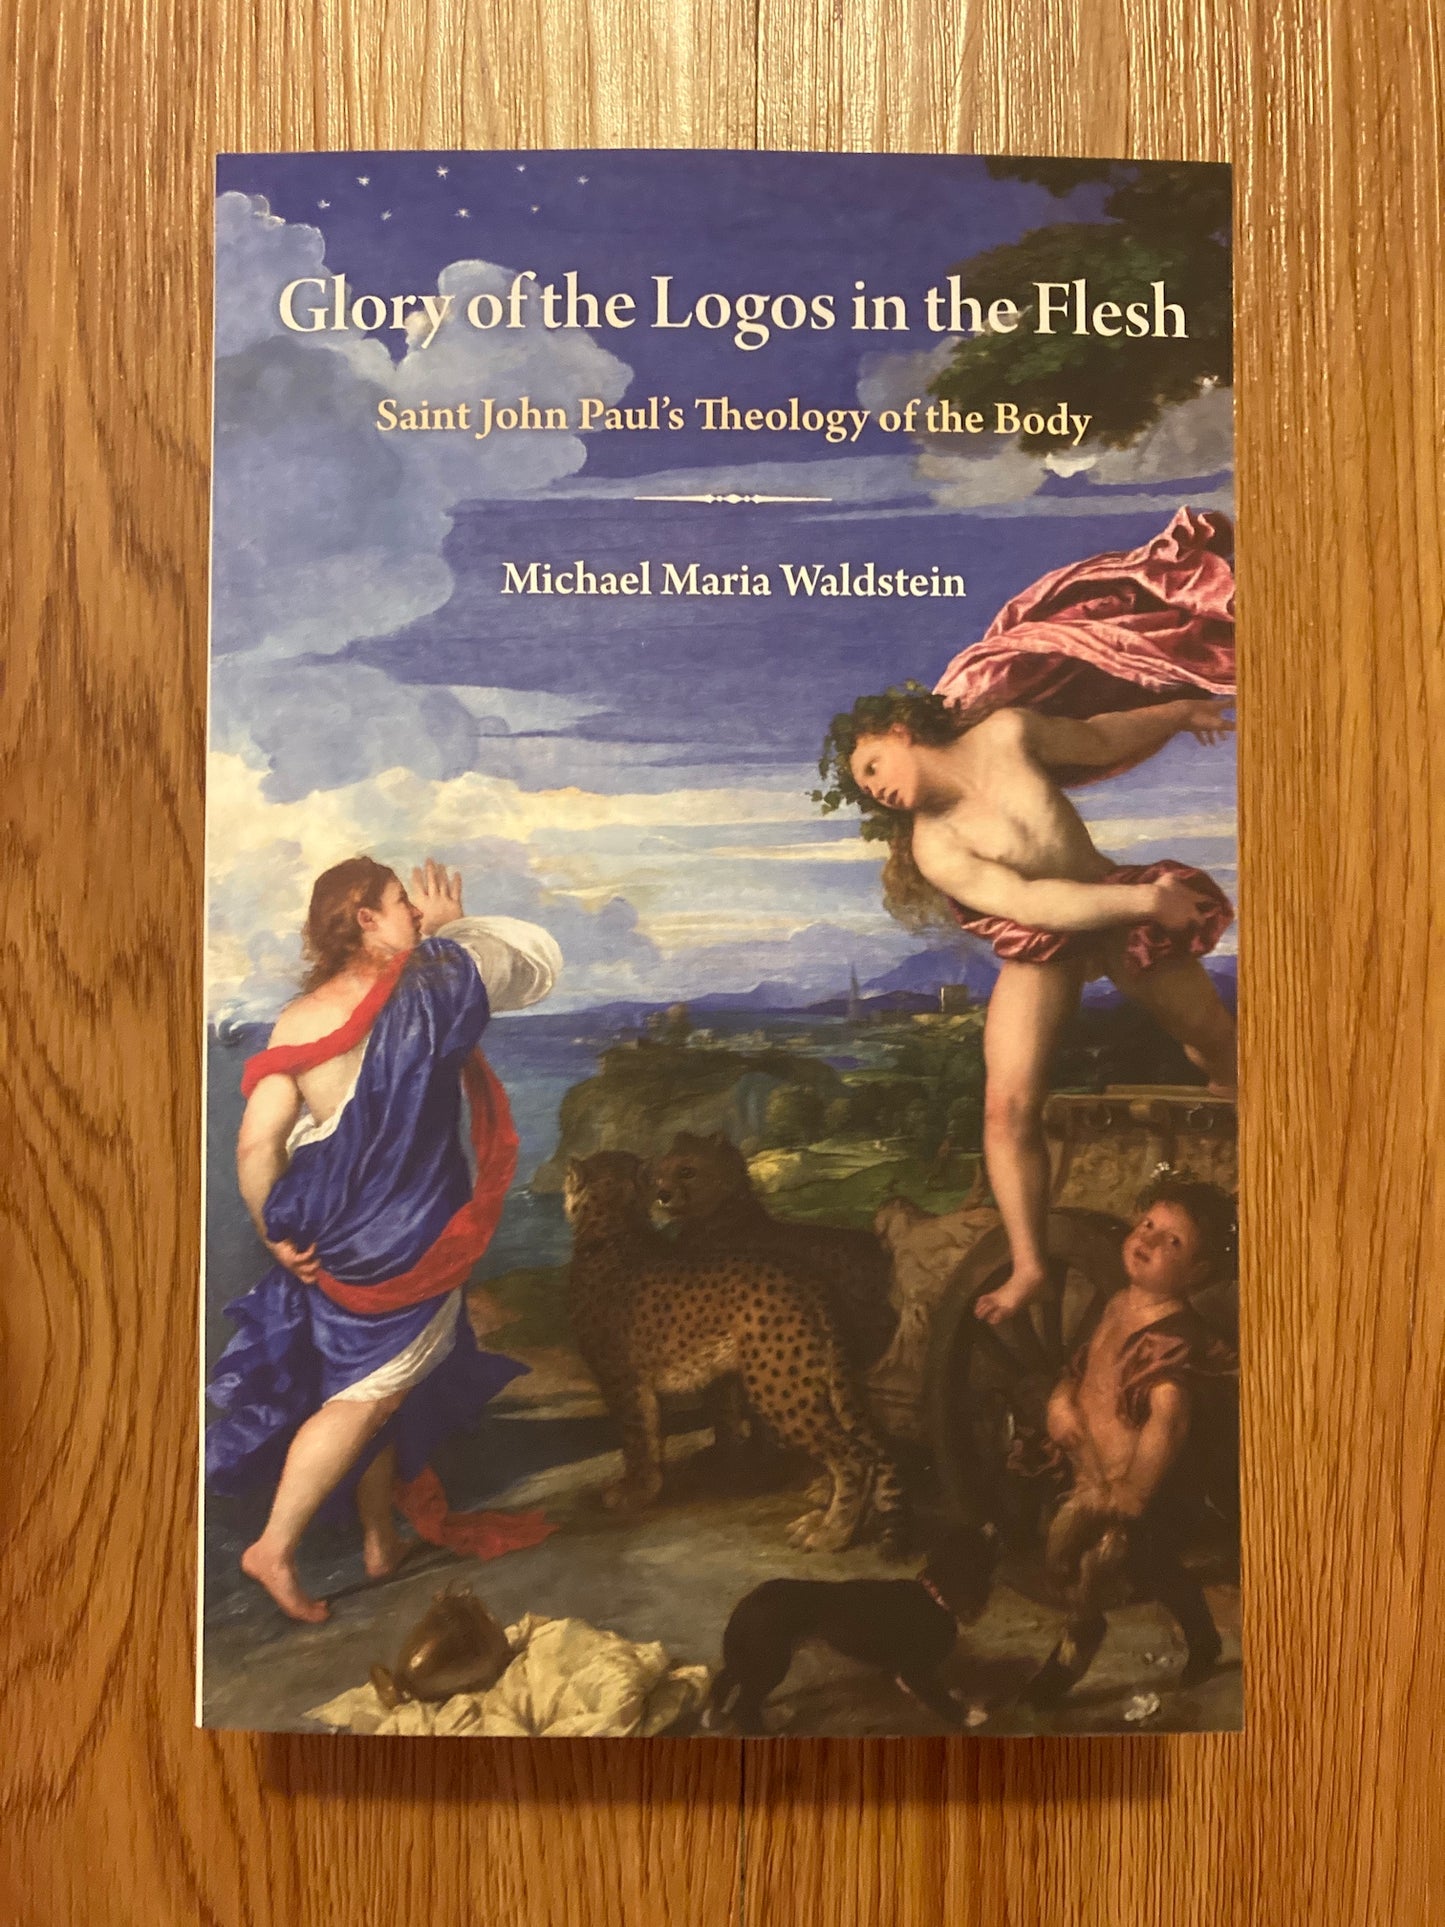 Glory of the Logos in the Flesh: John Paul's Theology of the Body